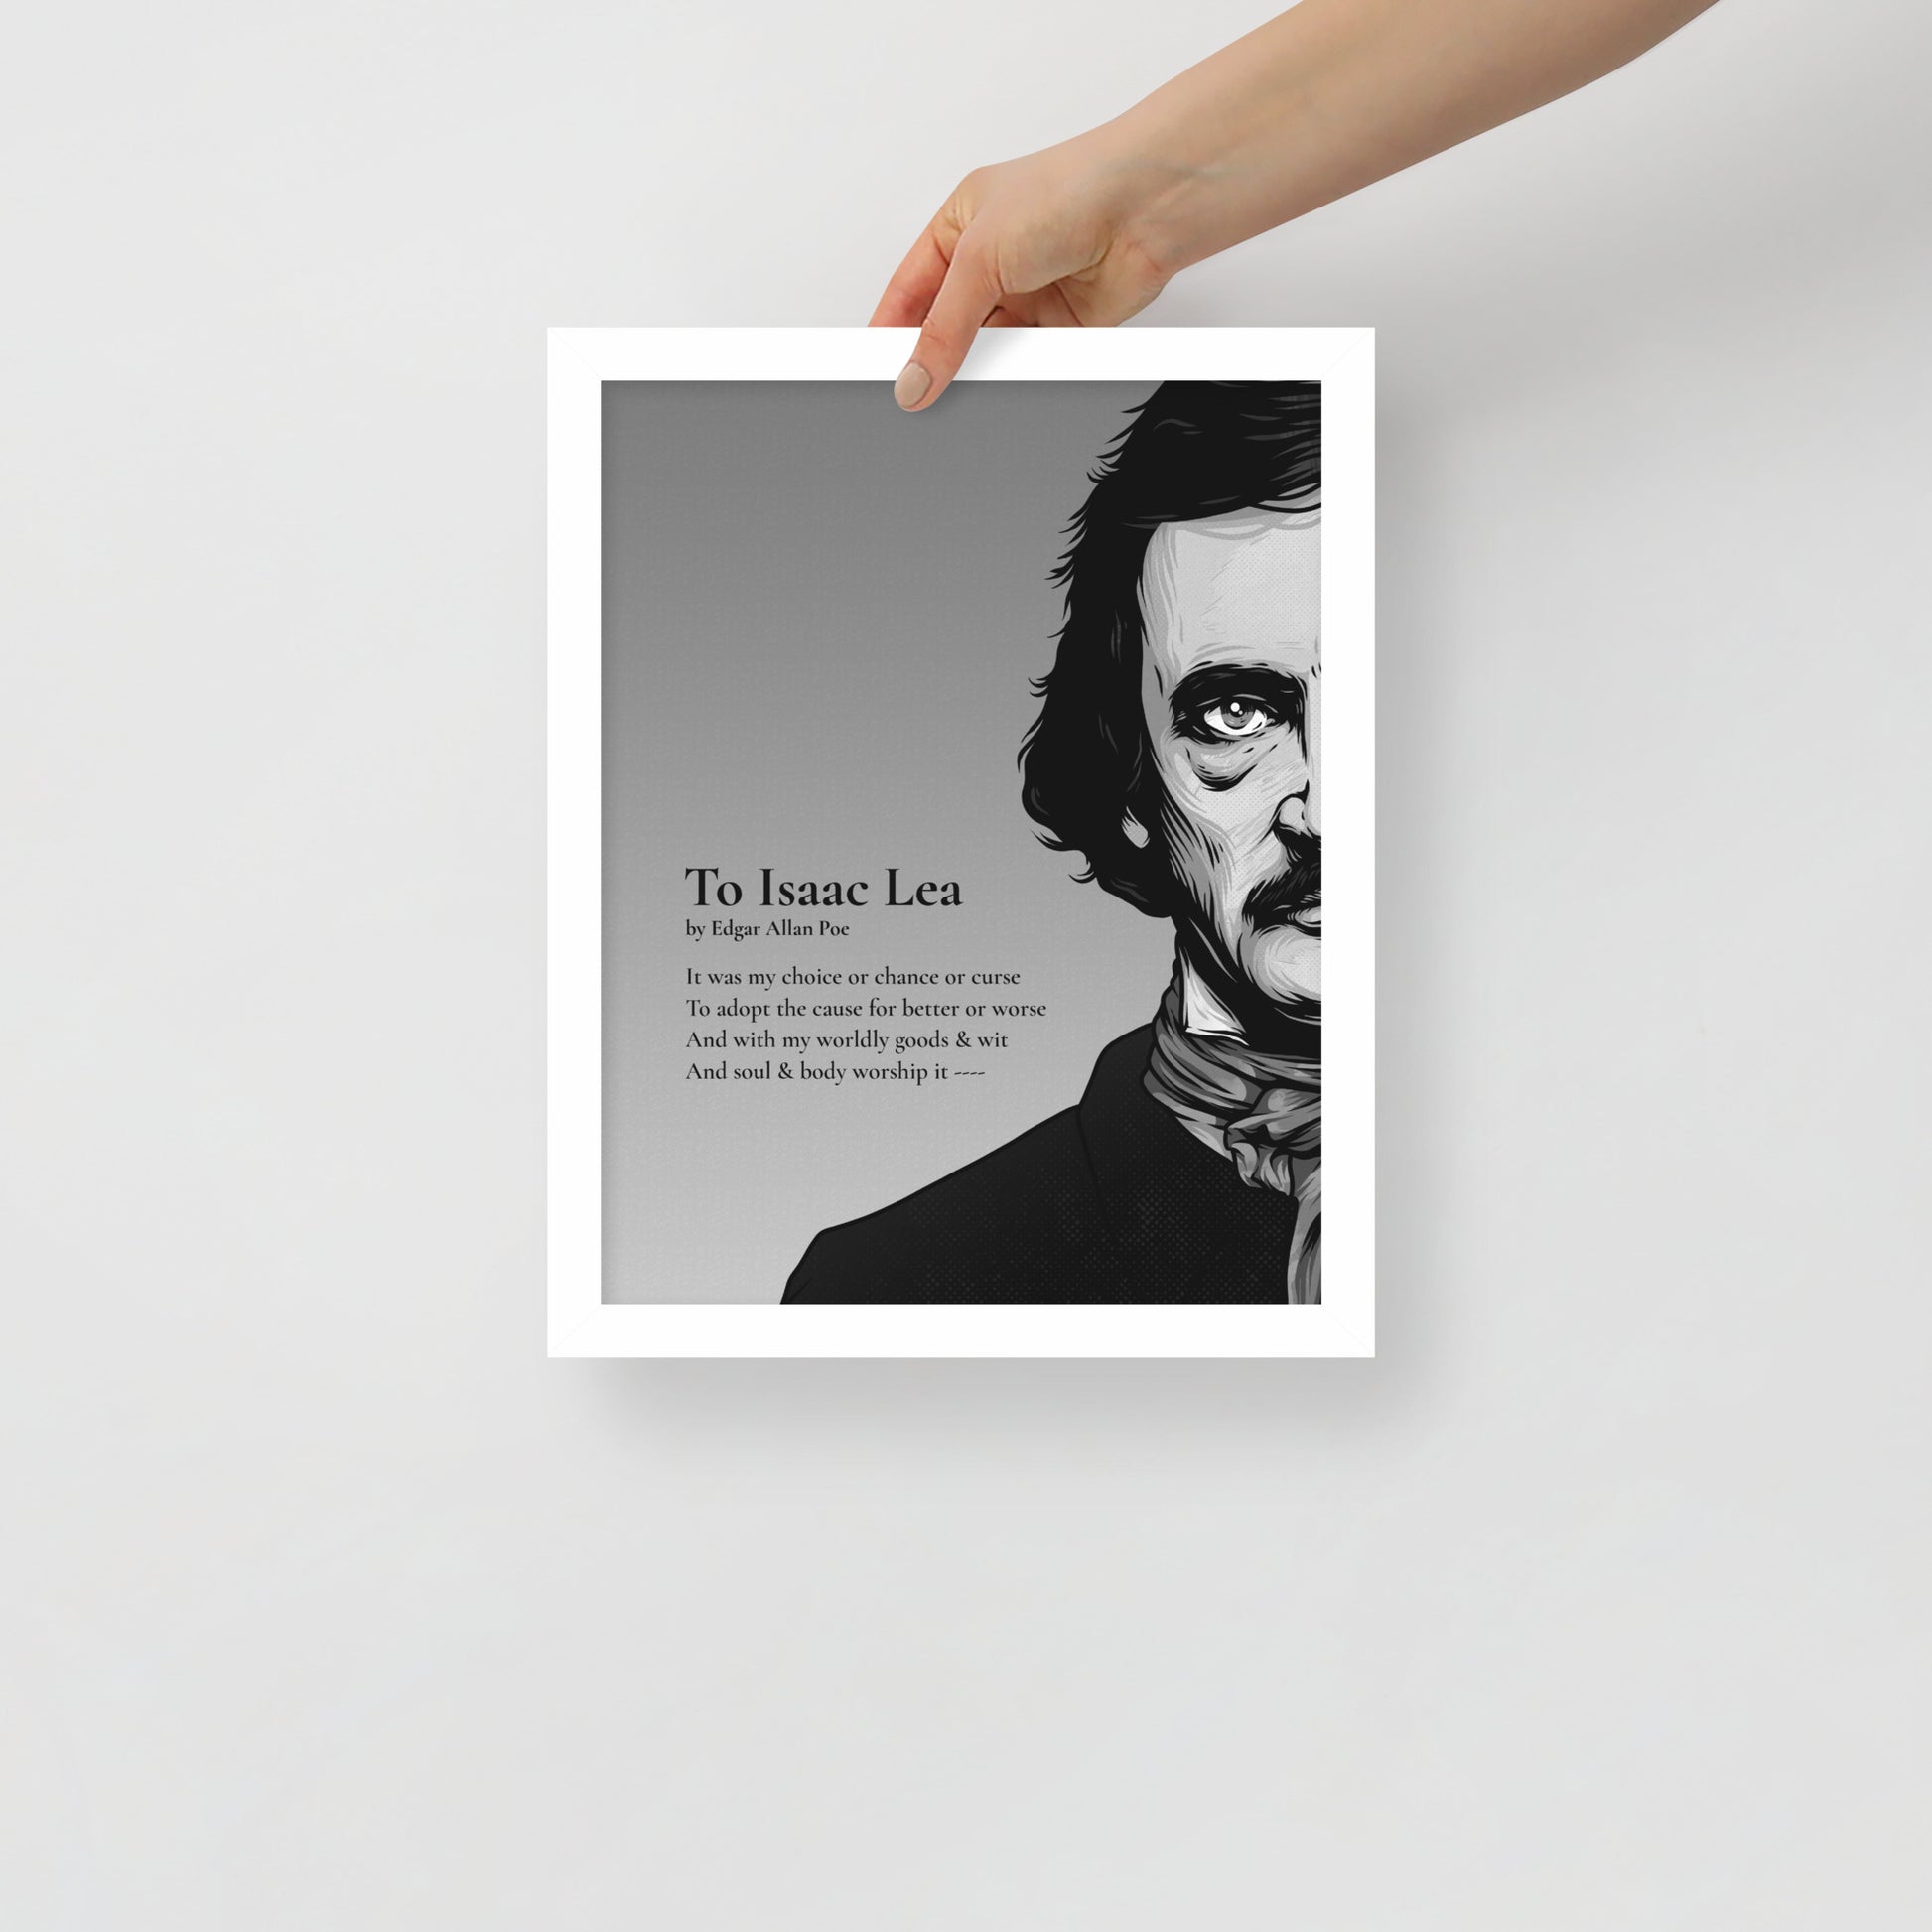 Edgar Allan Poe's 'To Isaac Lea' Framed Matted Poster - 11 x 14 White Frame